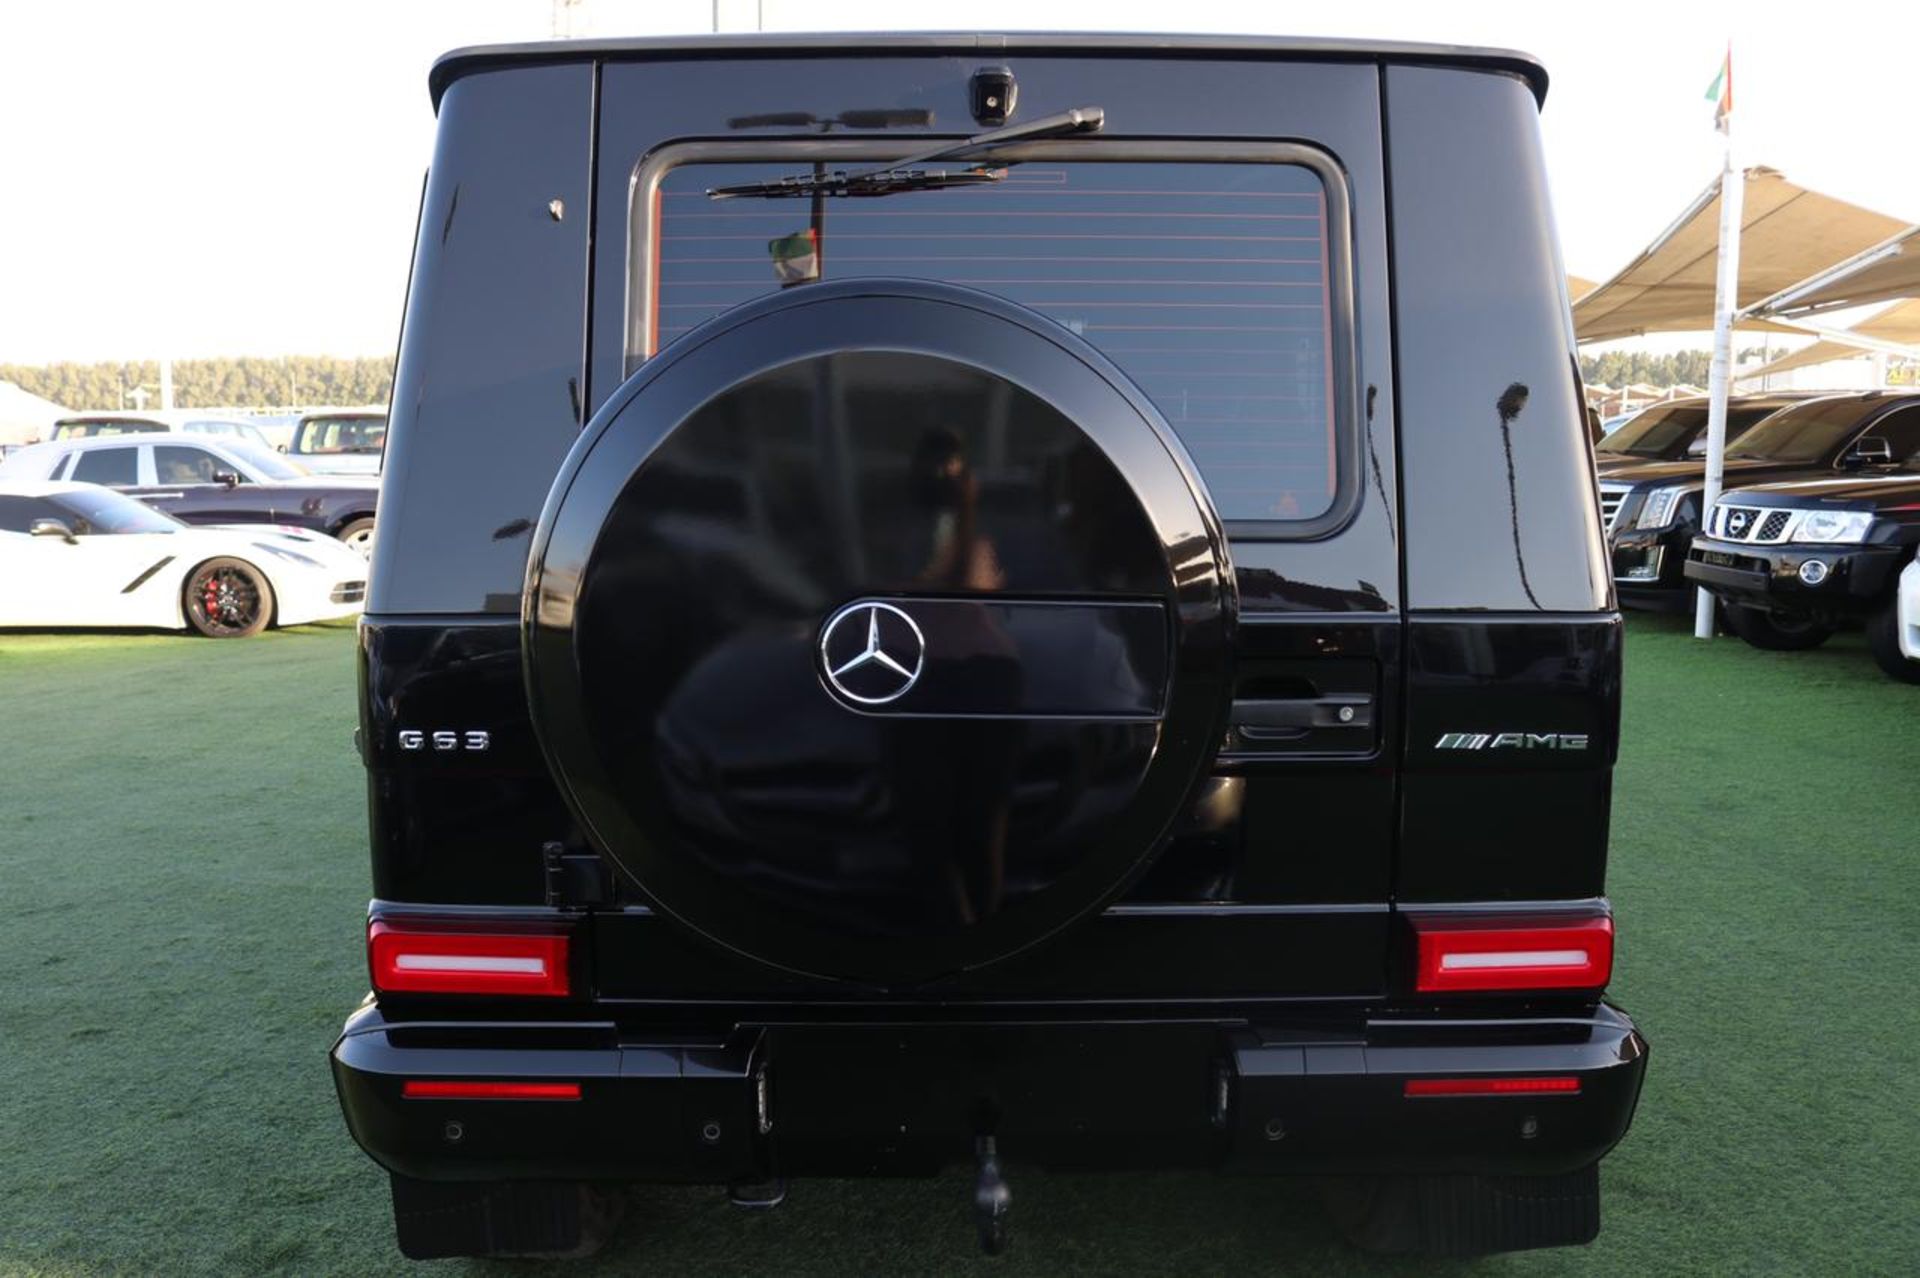 2011 MERCEDES G WAGON G55 changed to a 2020 G63 look Full outside exterior complete package !! - Image 5 of 36